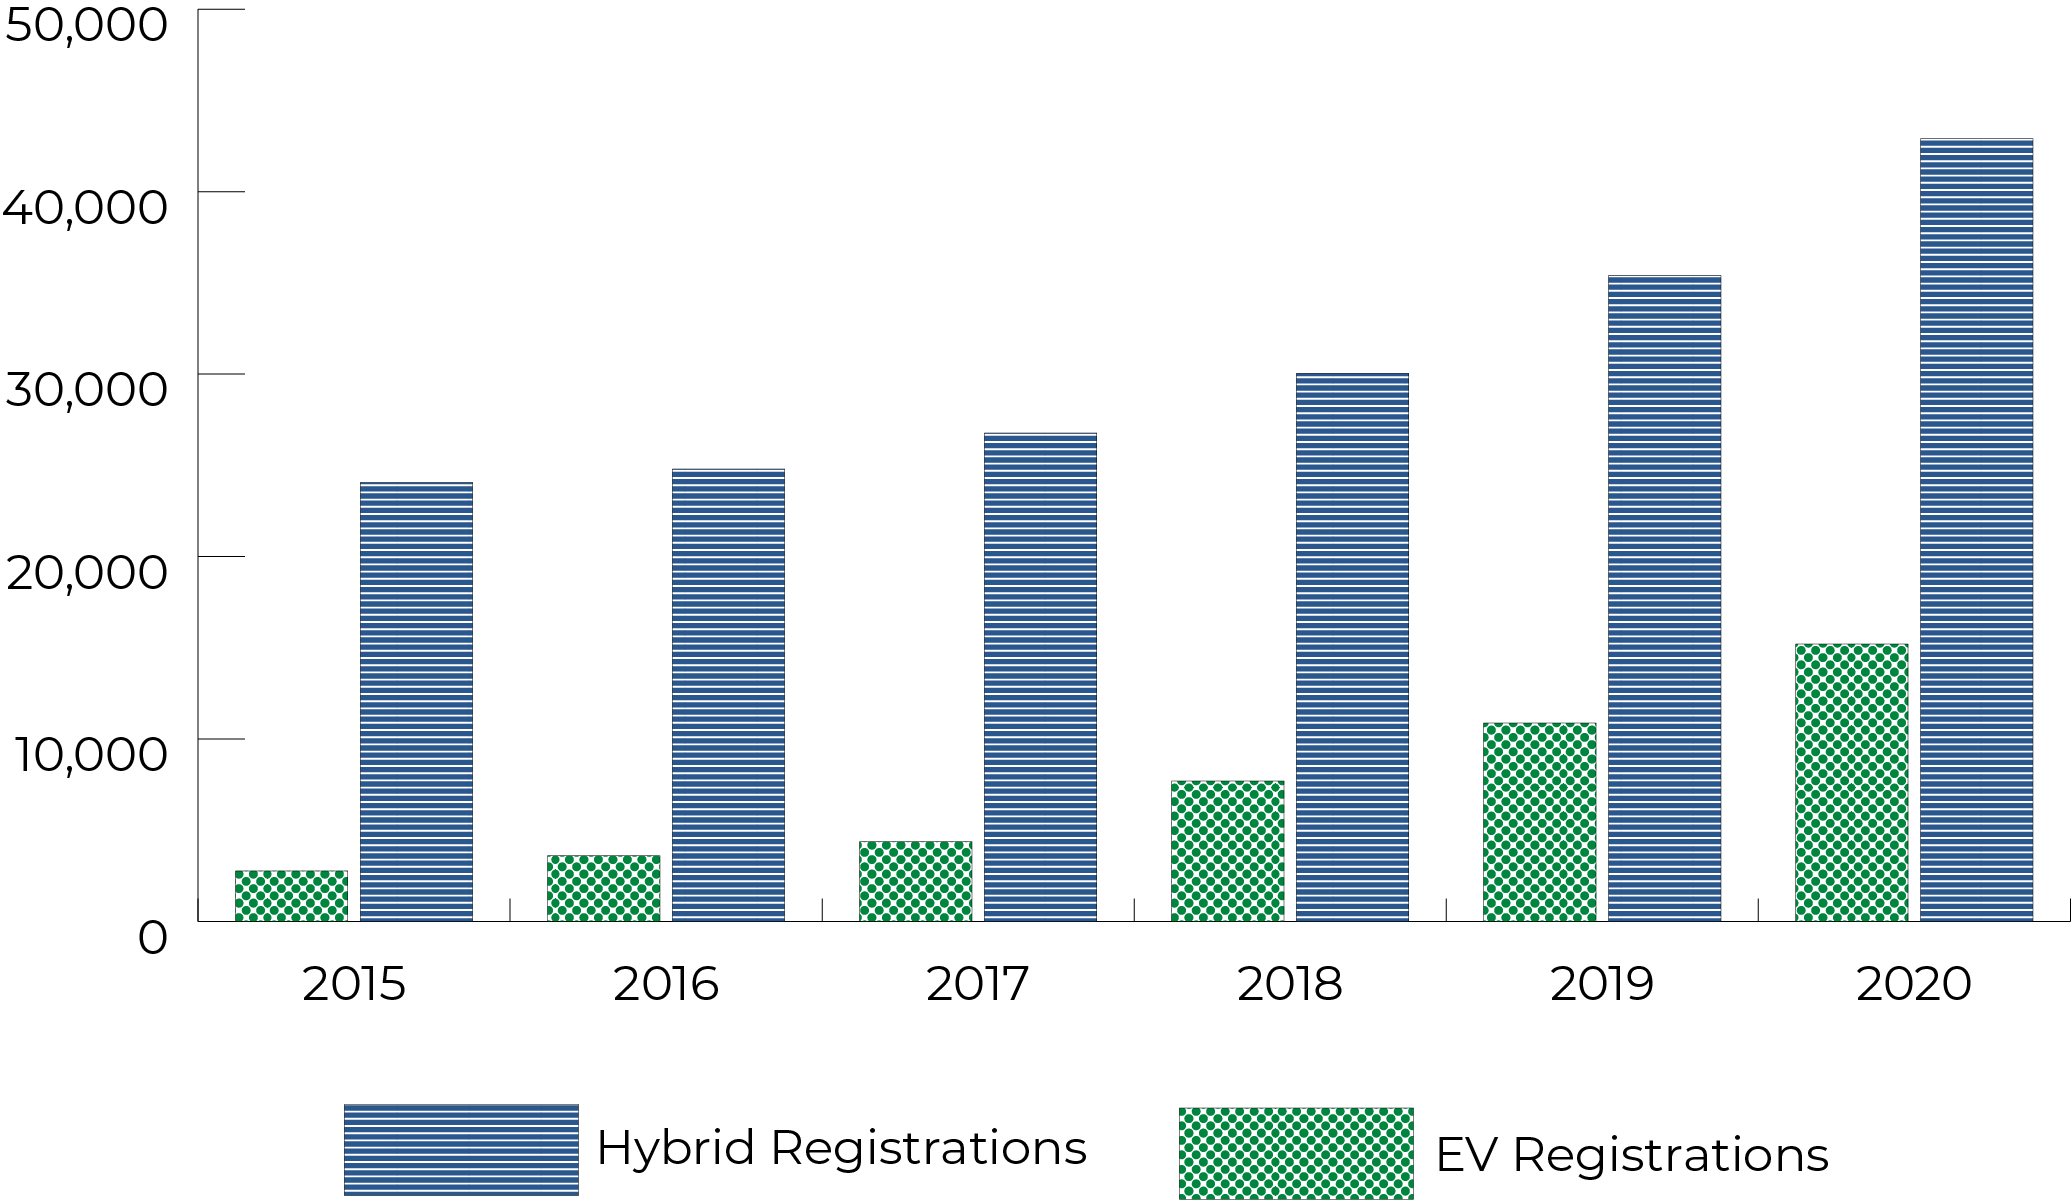 Bar chart showing number of registrations for electric and hybrid vehicles from 2015-2020.